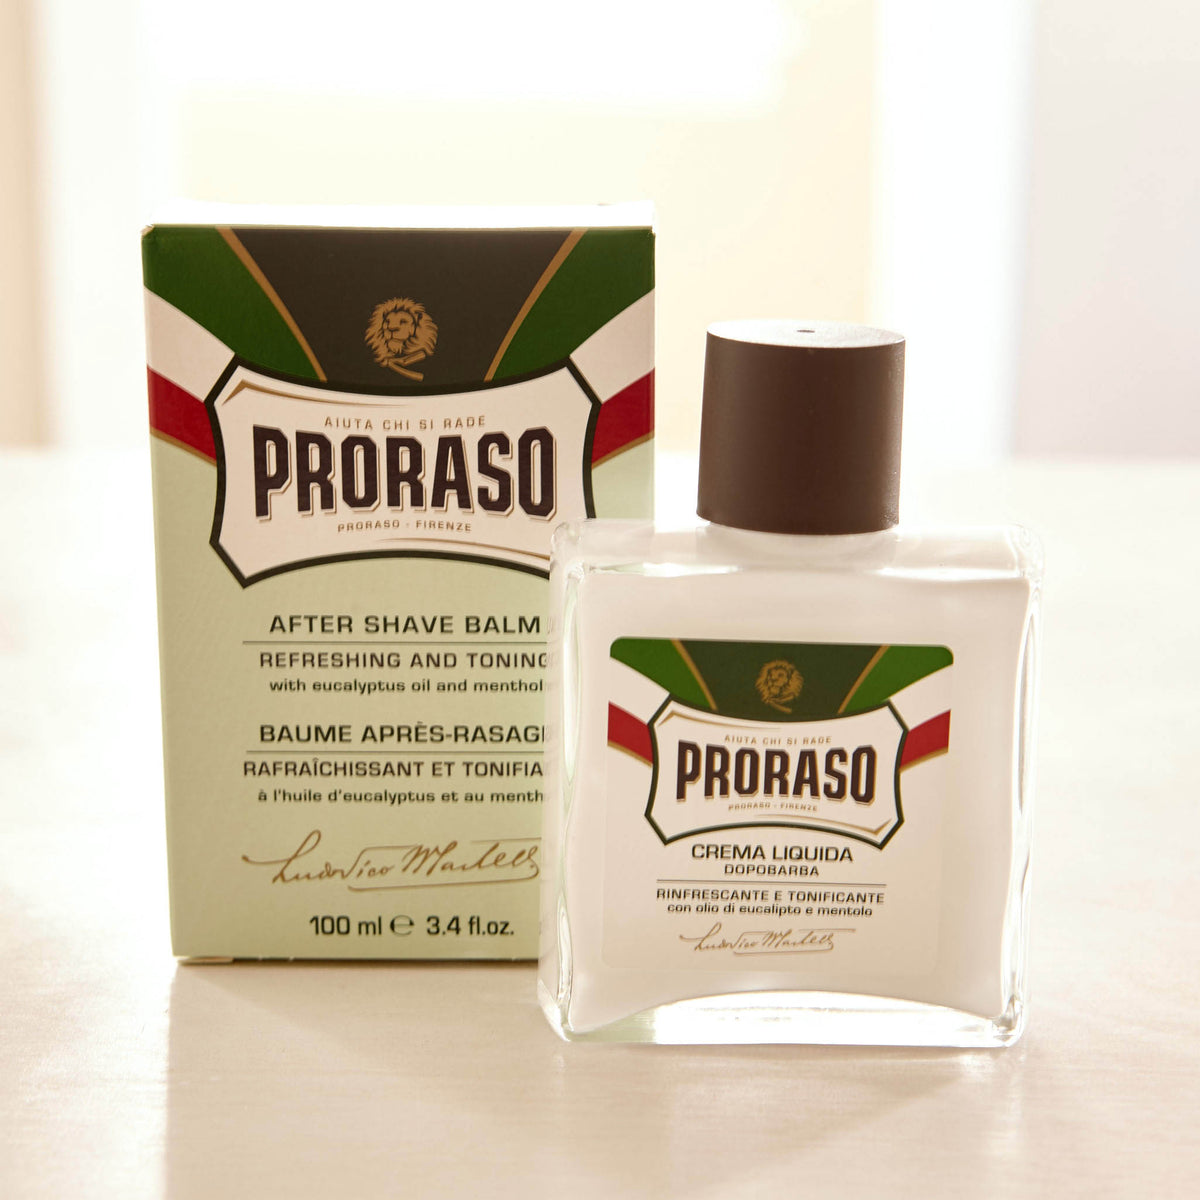 PRORASO AFTER-SHAVE BALM